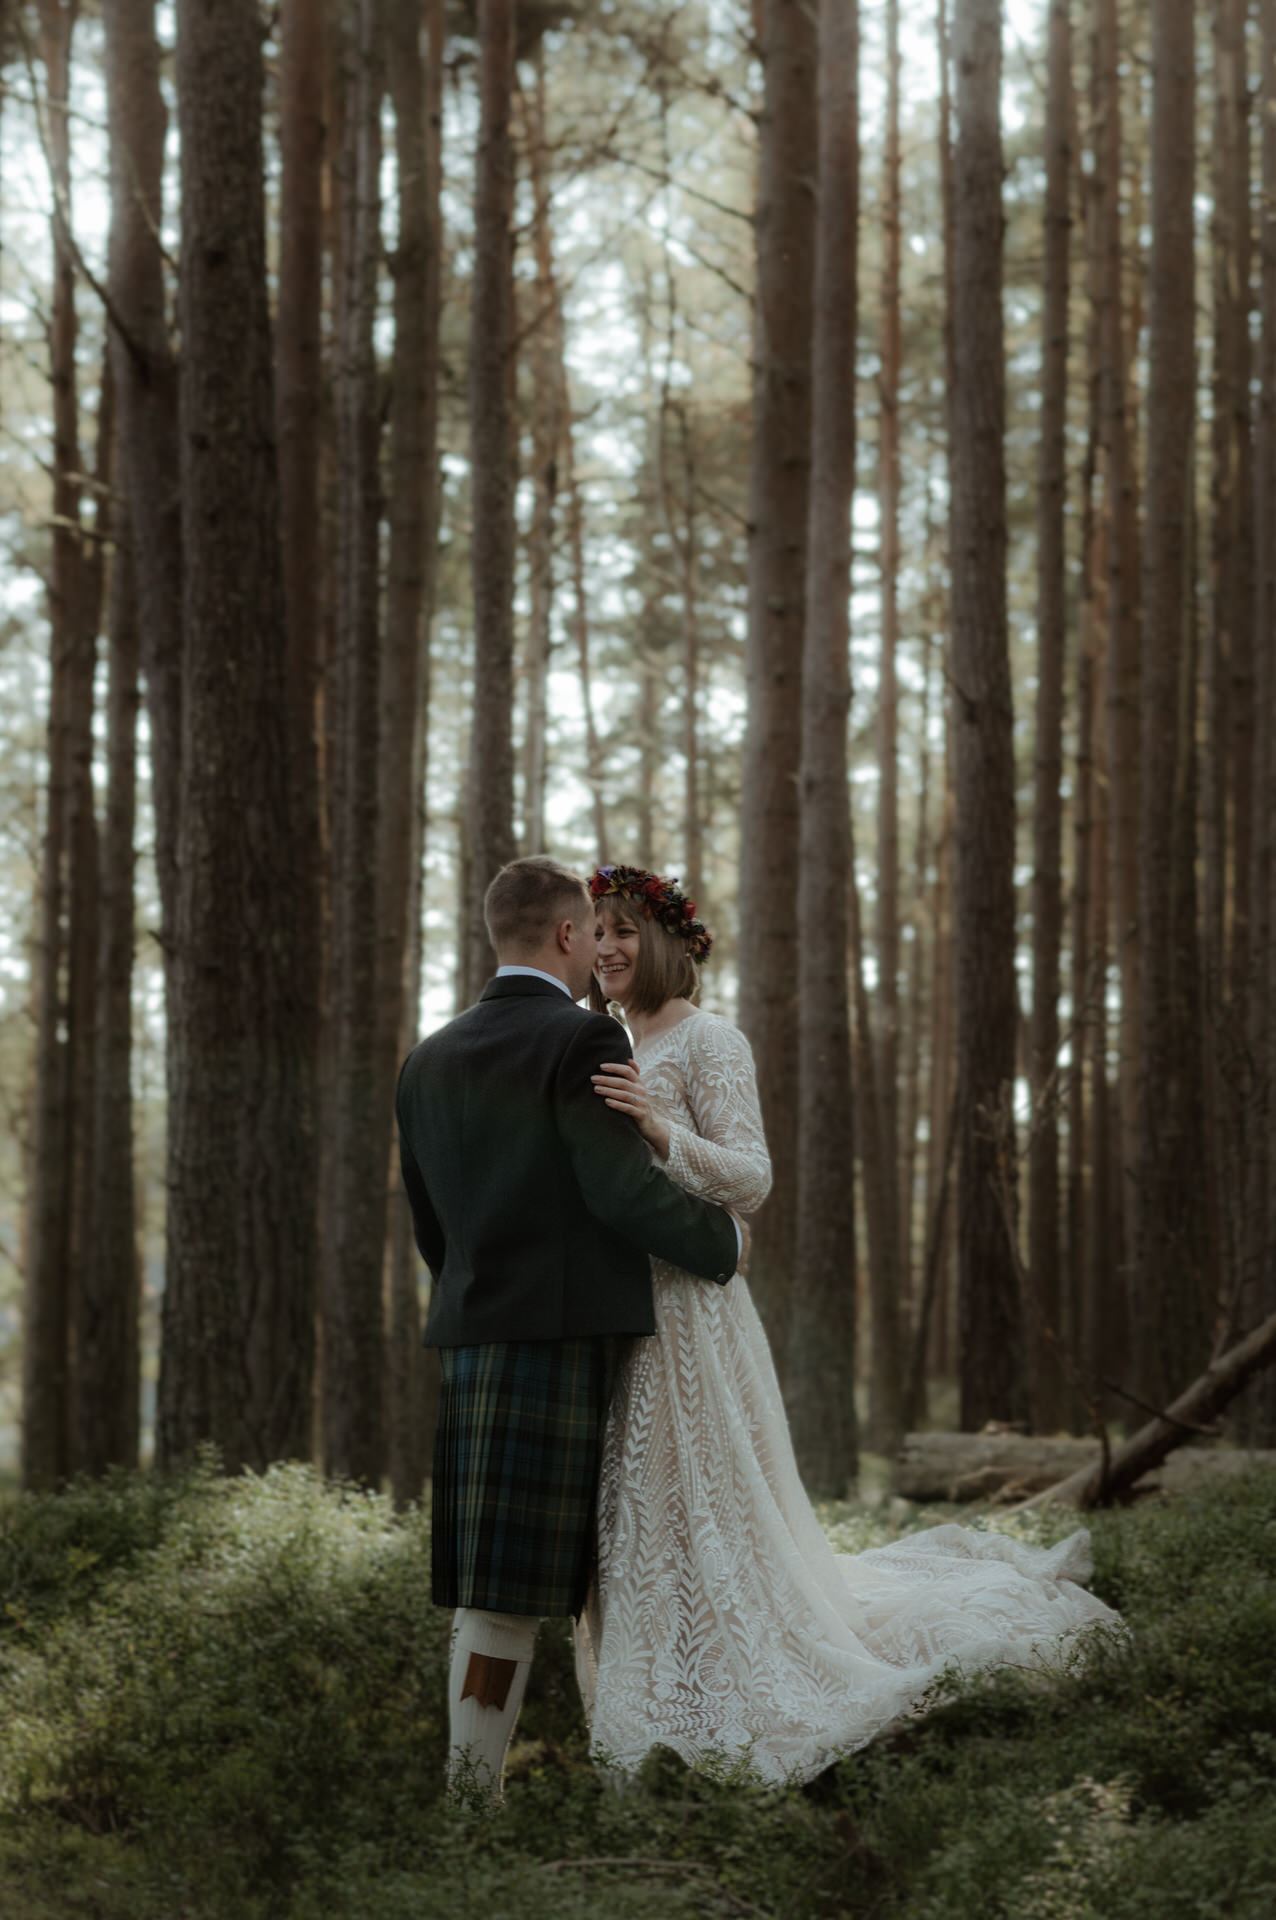 Bride and Groom walking in Woodland in the Cairngorm's national park on a Sunny day during their Scottish elopement